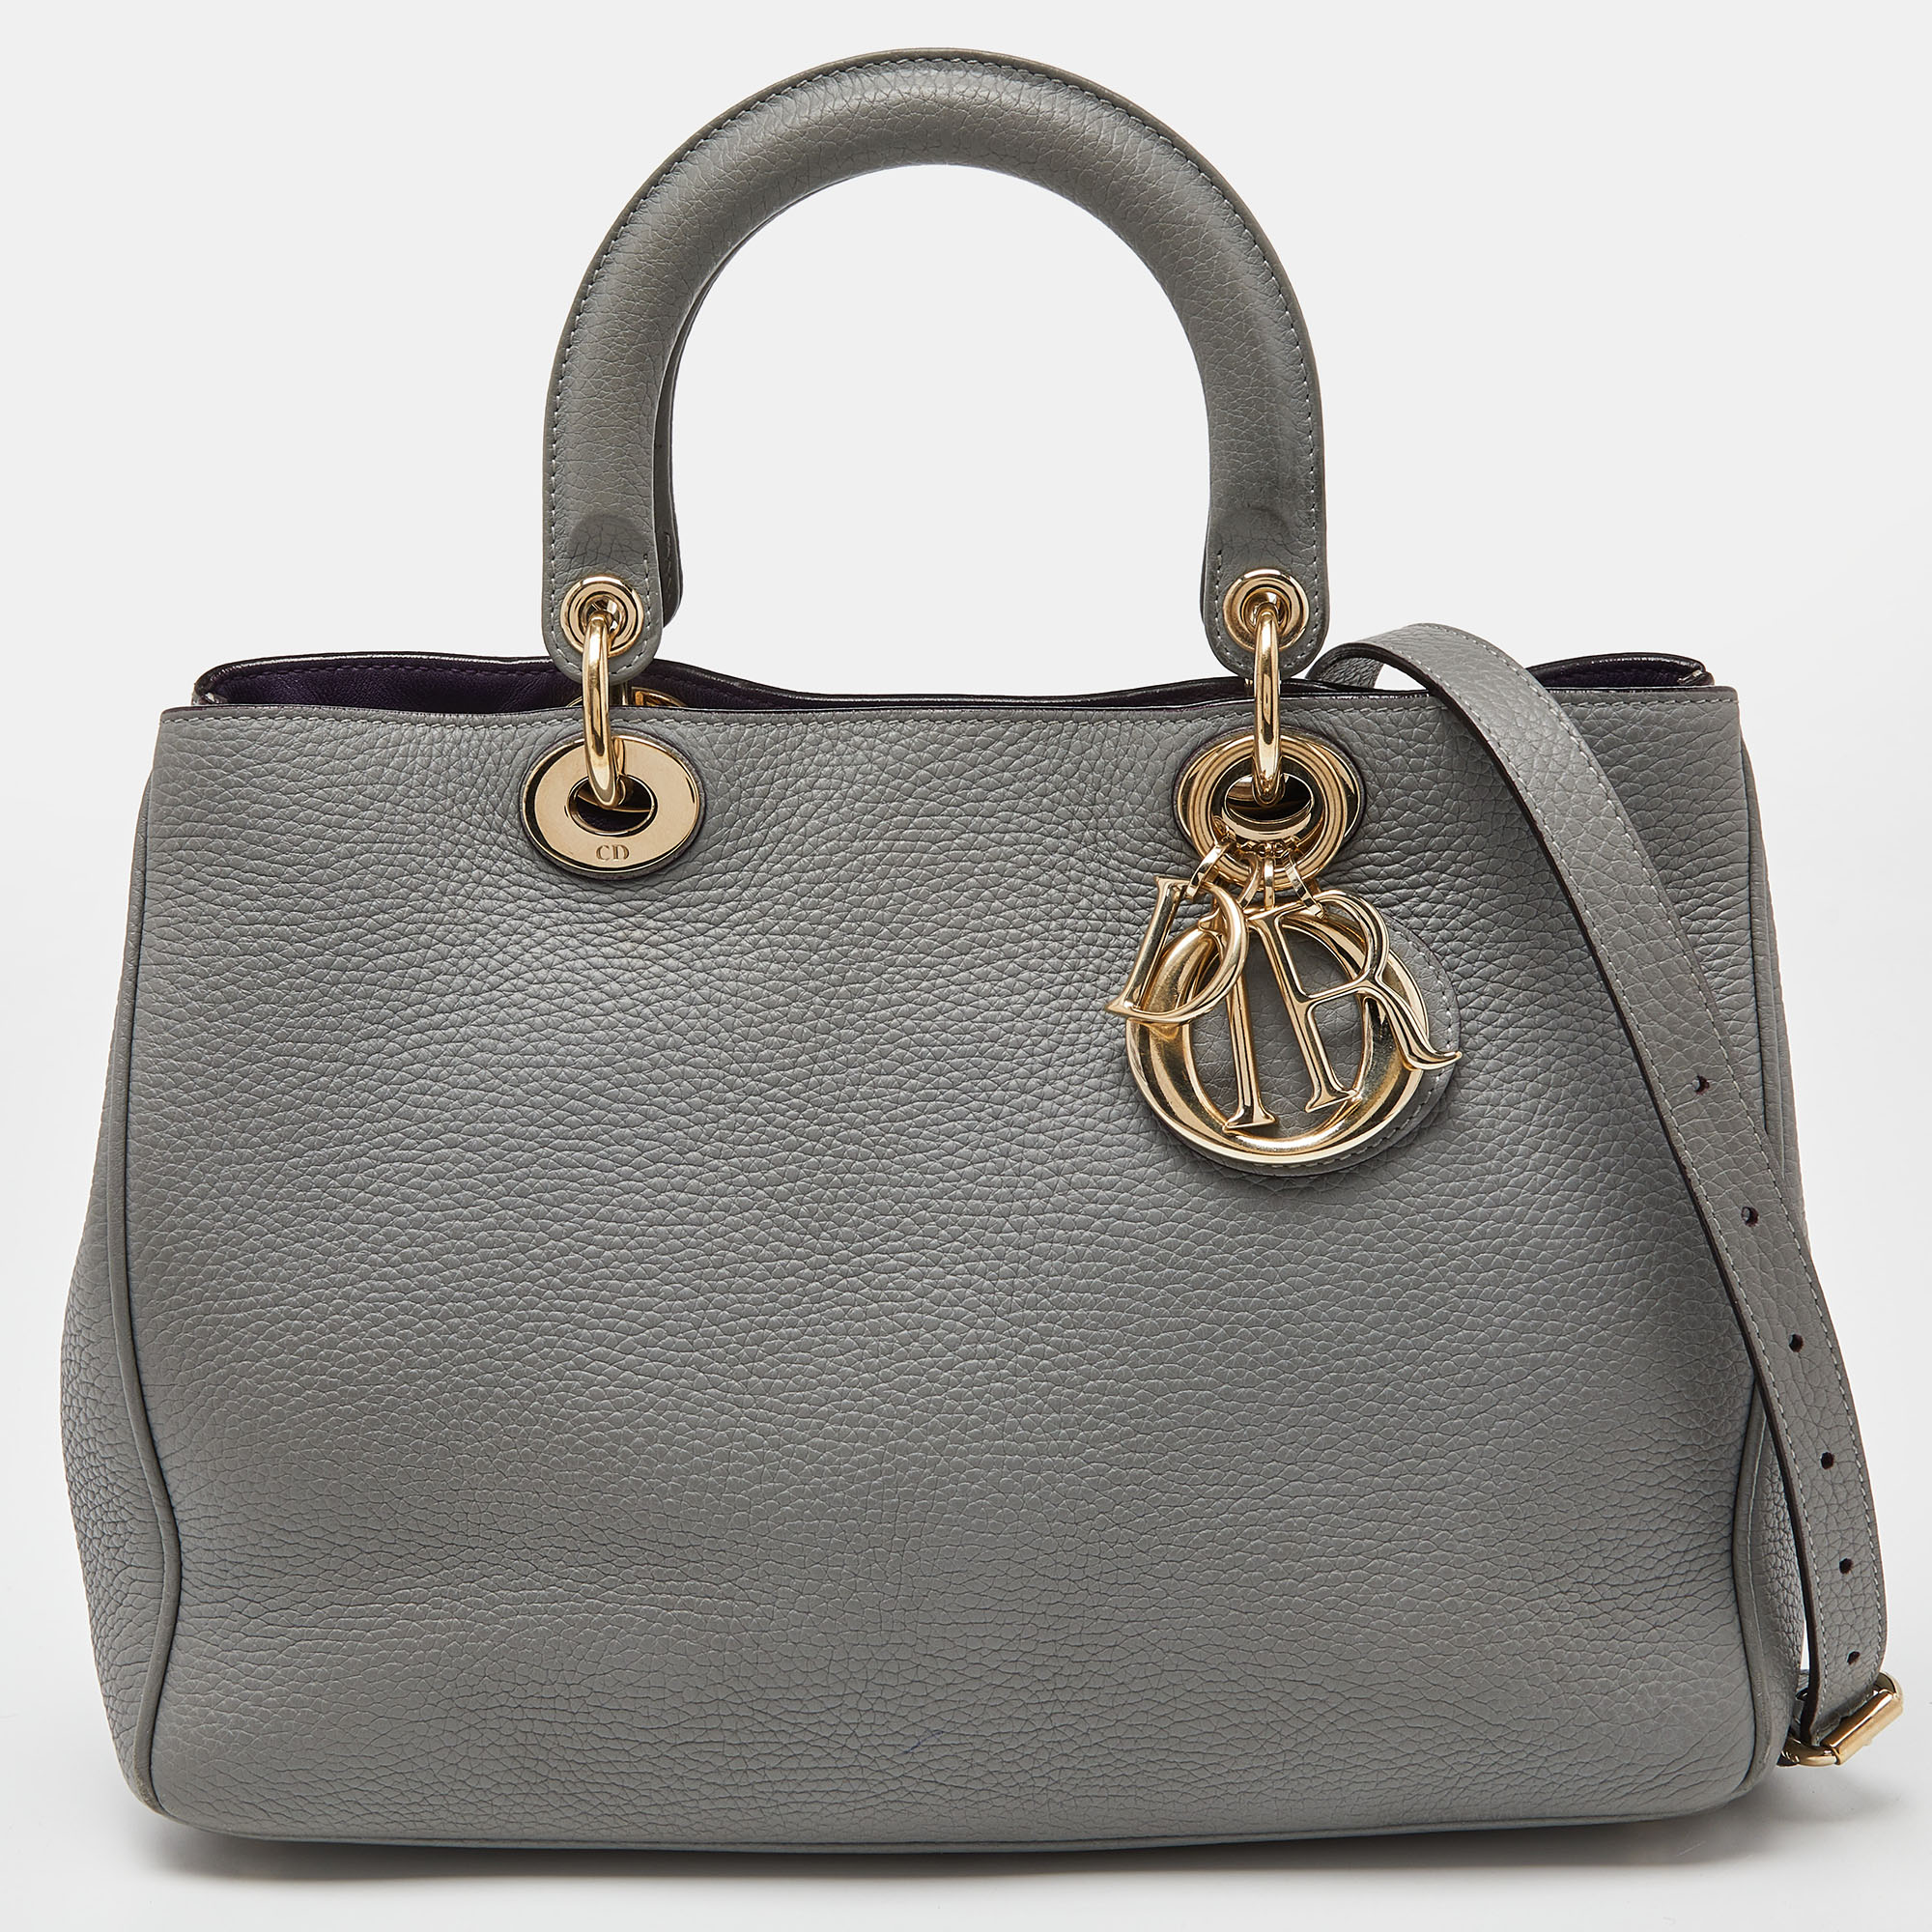 The Diorissimo perfectly captures the refined craftsmanship and the brands vision of timeless elegance. The spacious interior makes this Dior tote a highly functional accessory. Created from leather it is complemented with top dual handles a shoulder strap and gold tone hardware. The DIOR letter charms on the front lend it a luxe finish.